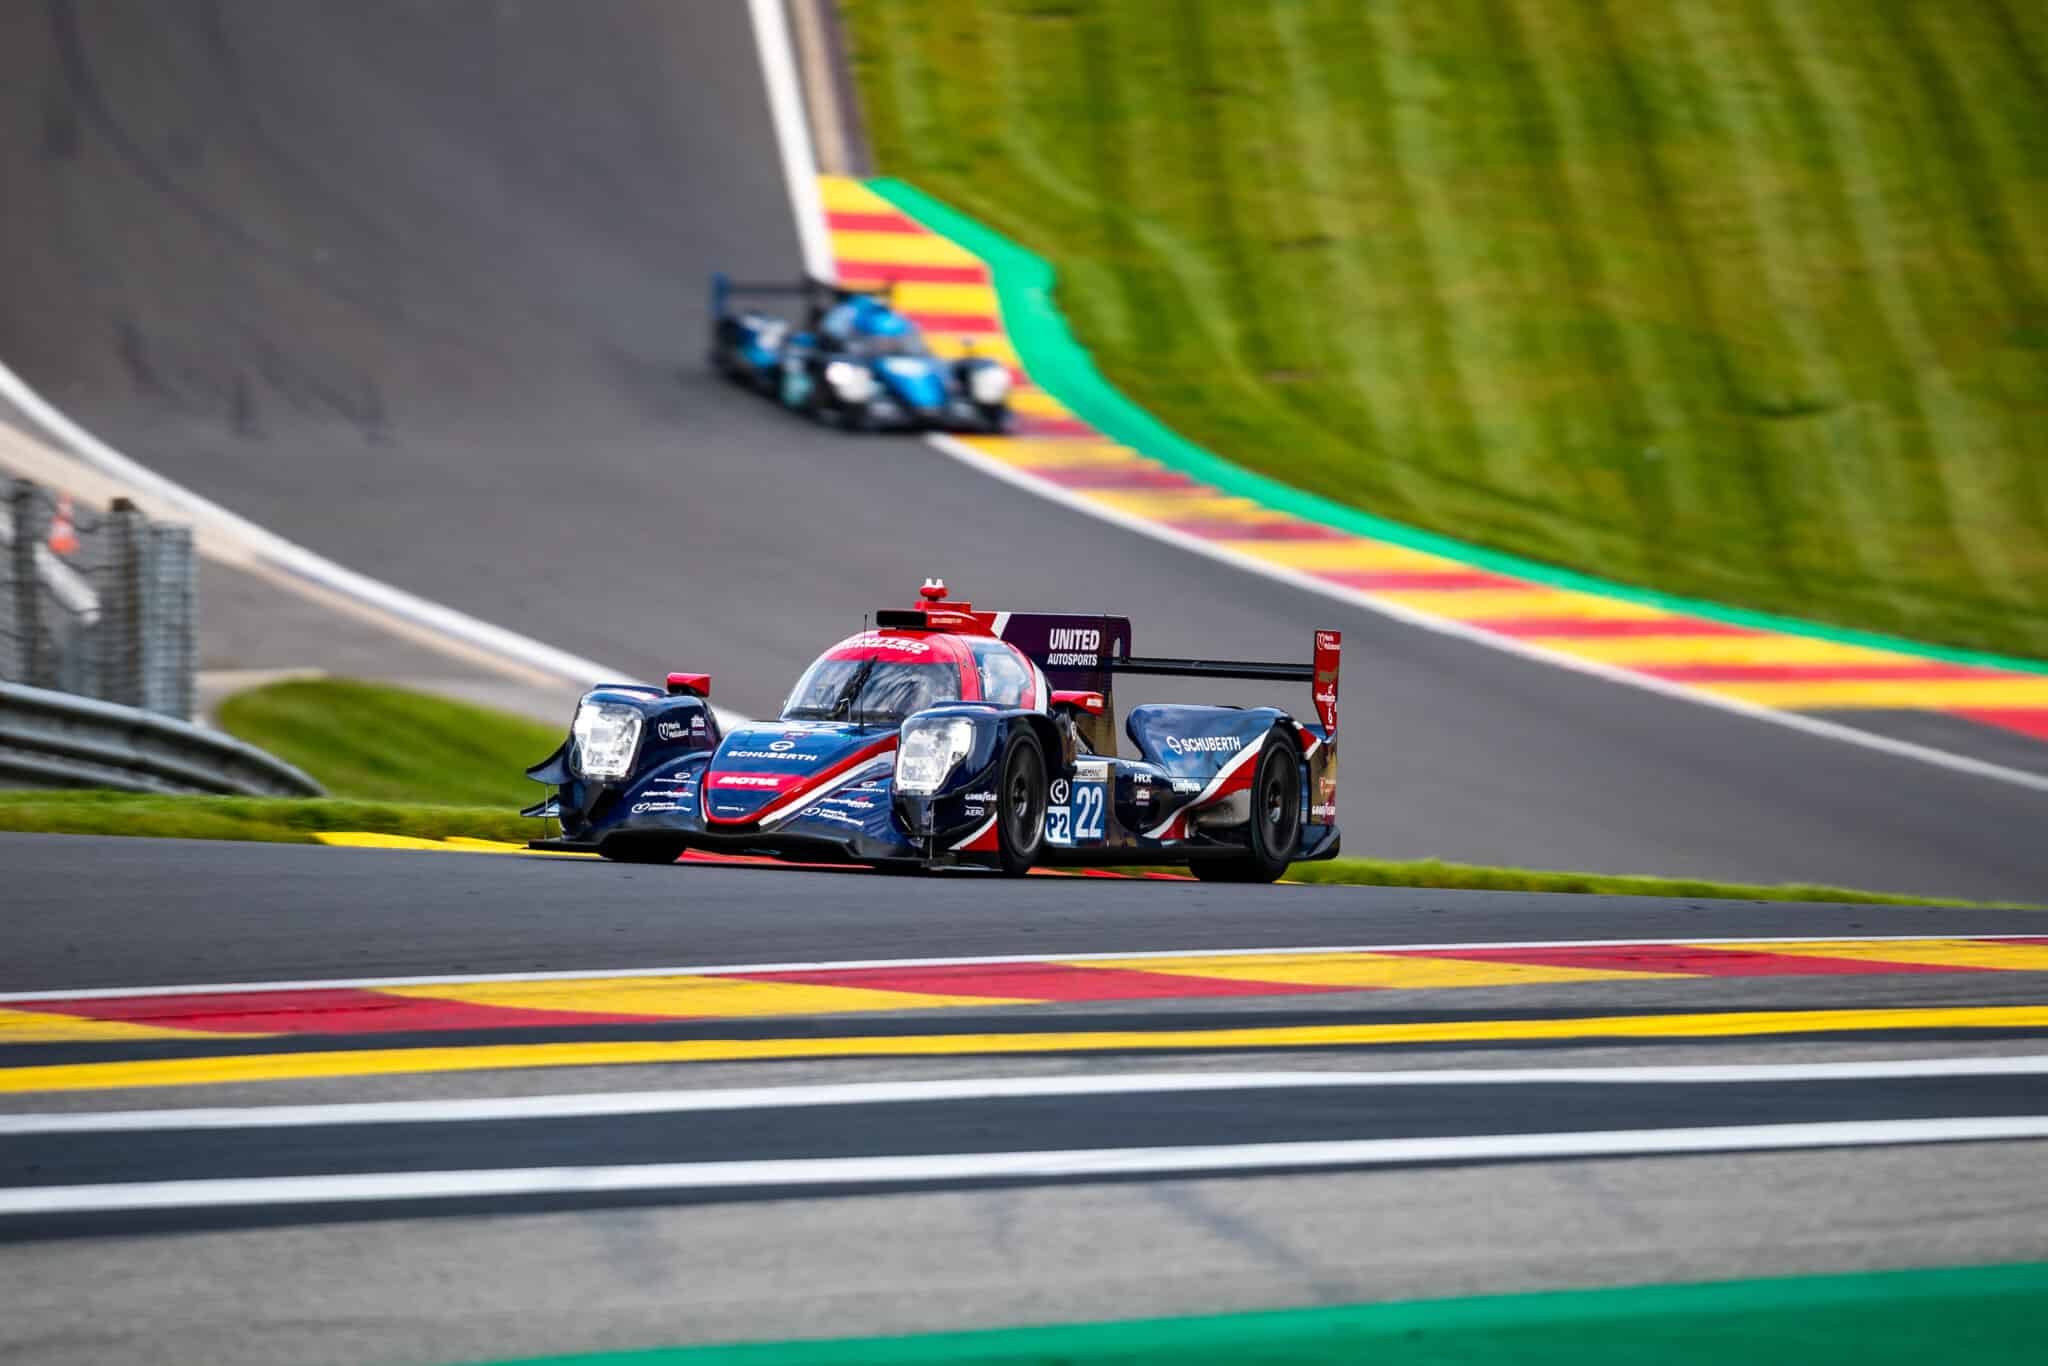 - FP1 4 Hours of SPA: Phil Hanson fastest with United Autosports USA #22